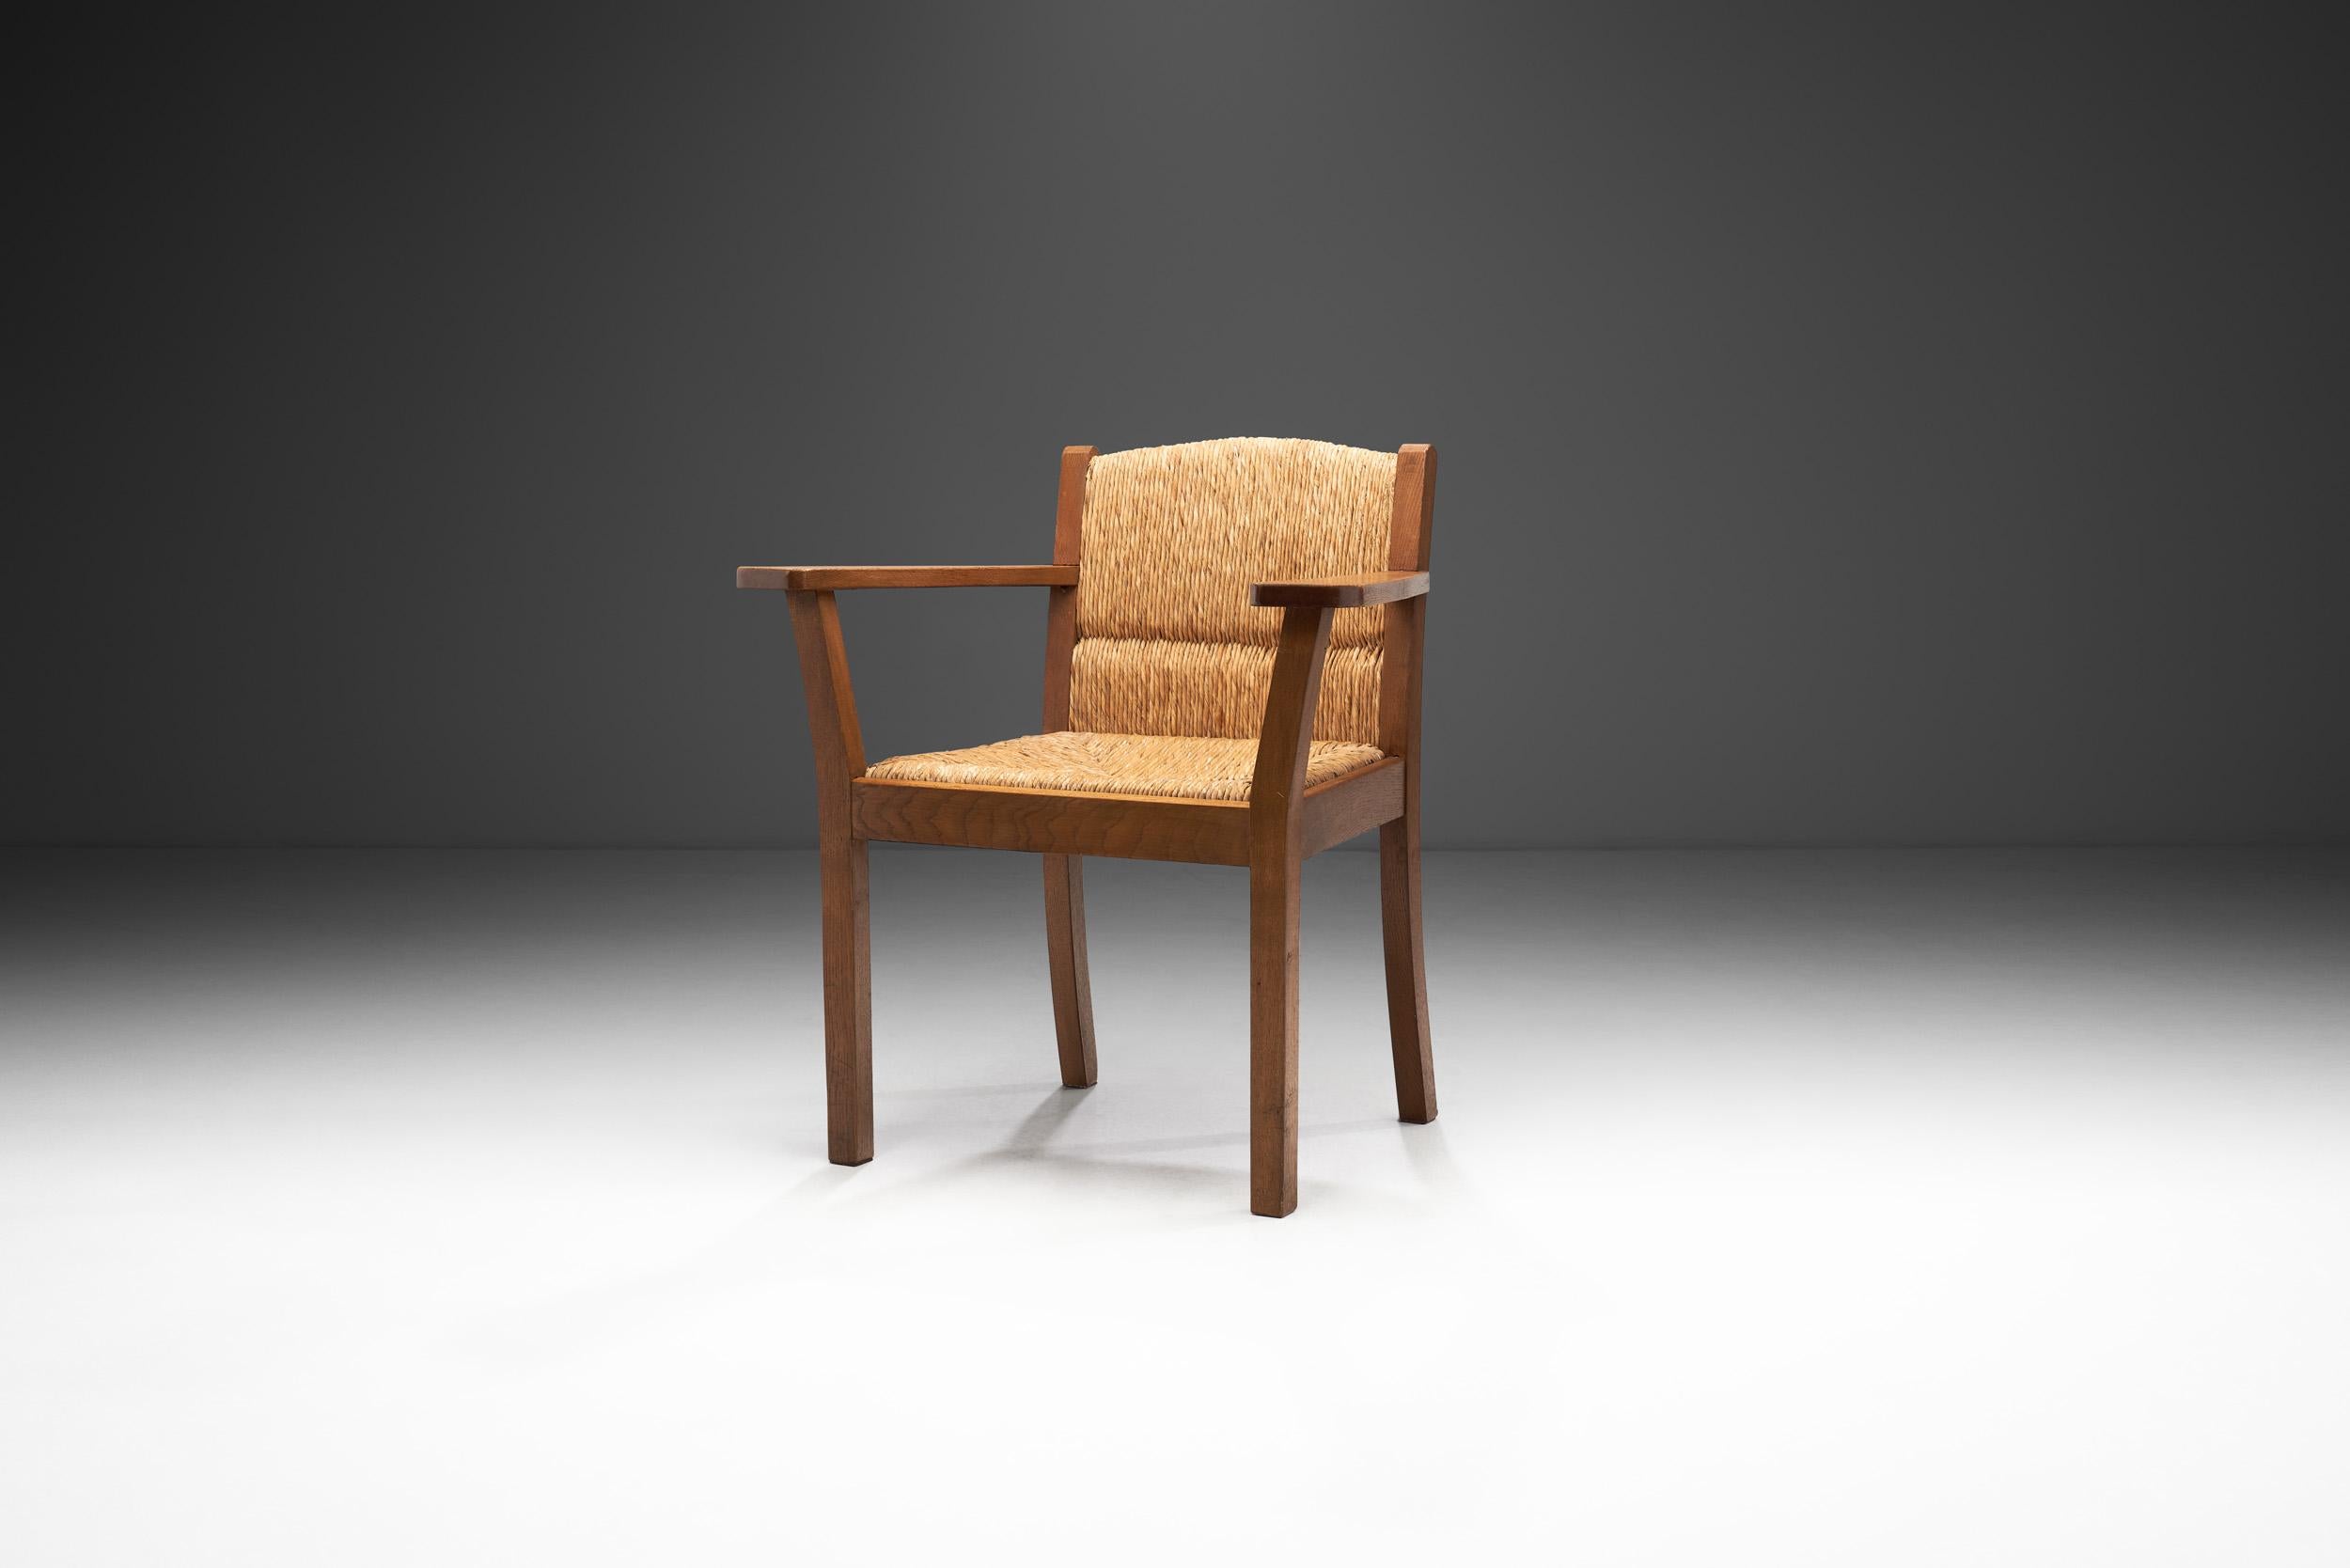 This beautiful  'Worpsweder' armchair was designed in the 1920s by German artist, Willi Ohler and was manufactured by Erich Schultz in Germany. The so-called “Worpsweder” either denote chairs made at the Worpsweder Kunsthütten (Worpsweder arts huts)